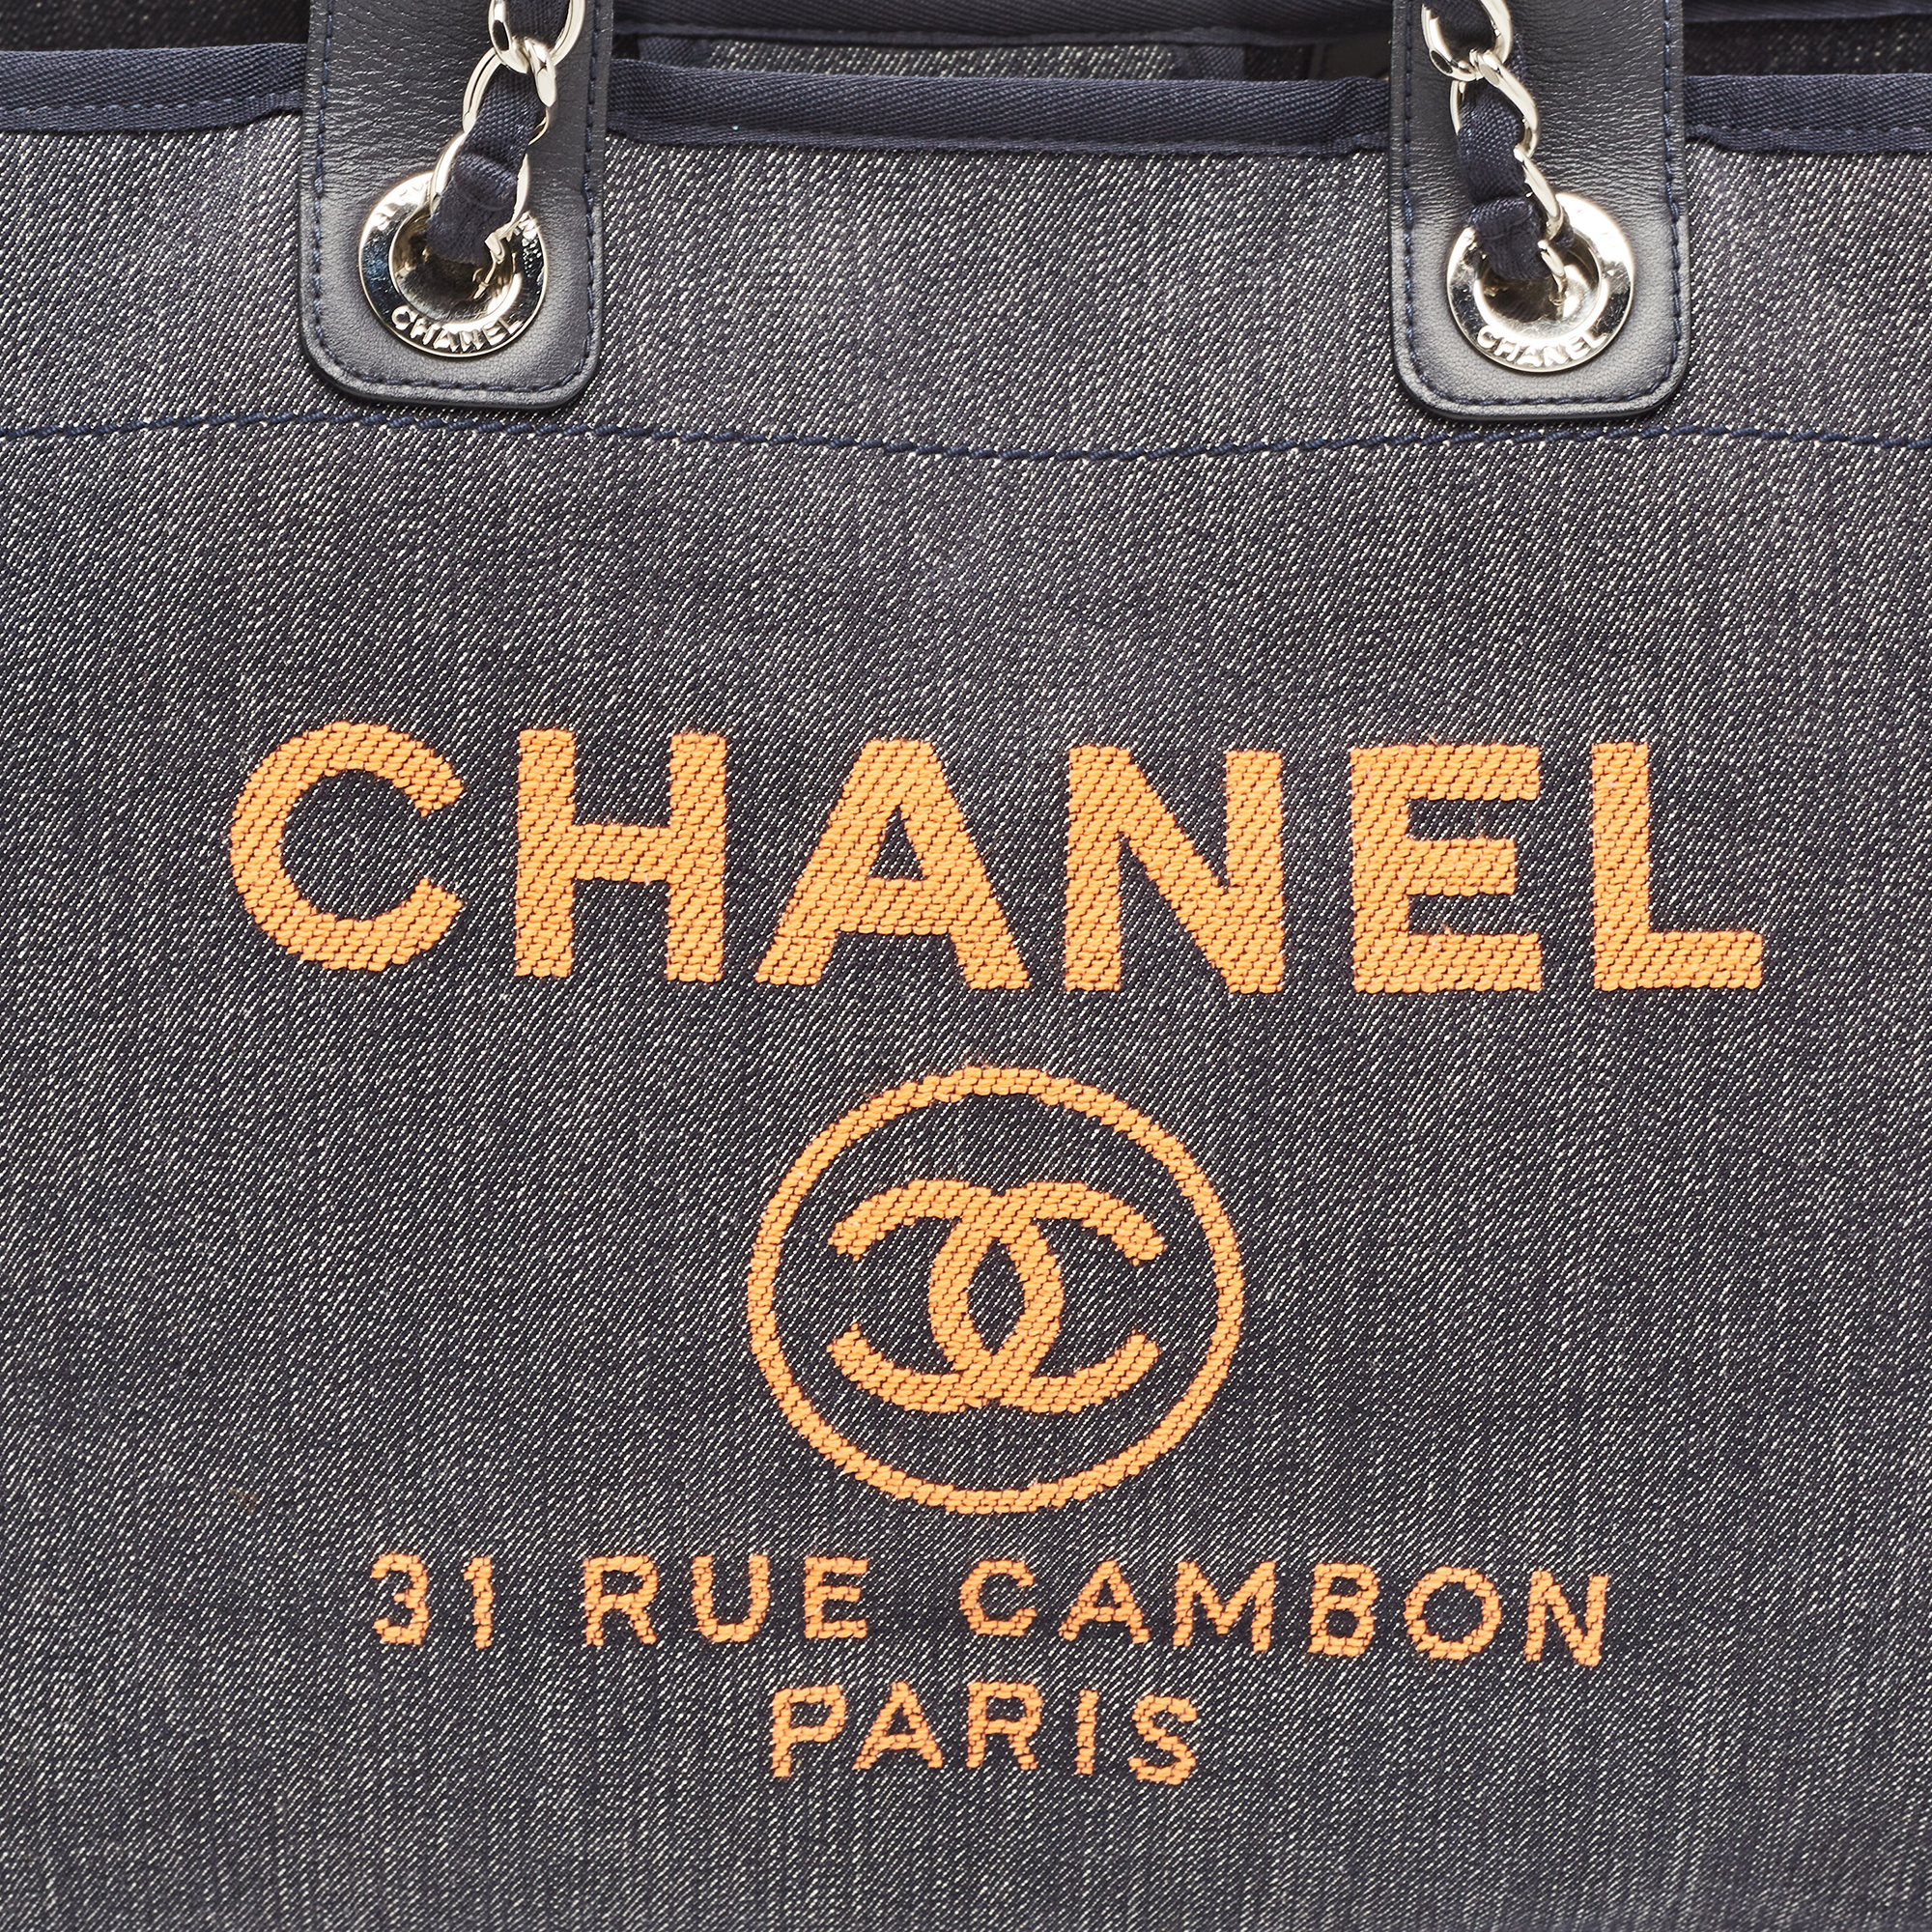 Chanel Blue Denim And Leather Medium Deauville Shopper Tote